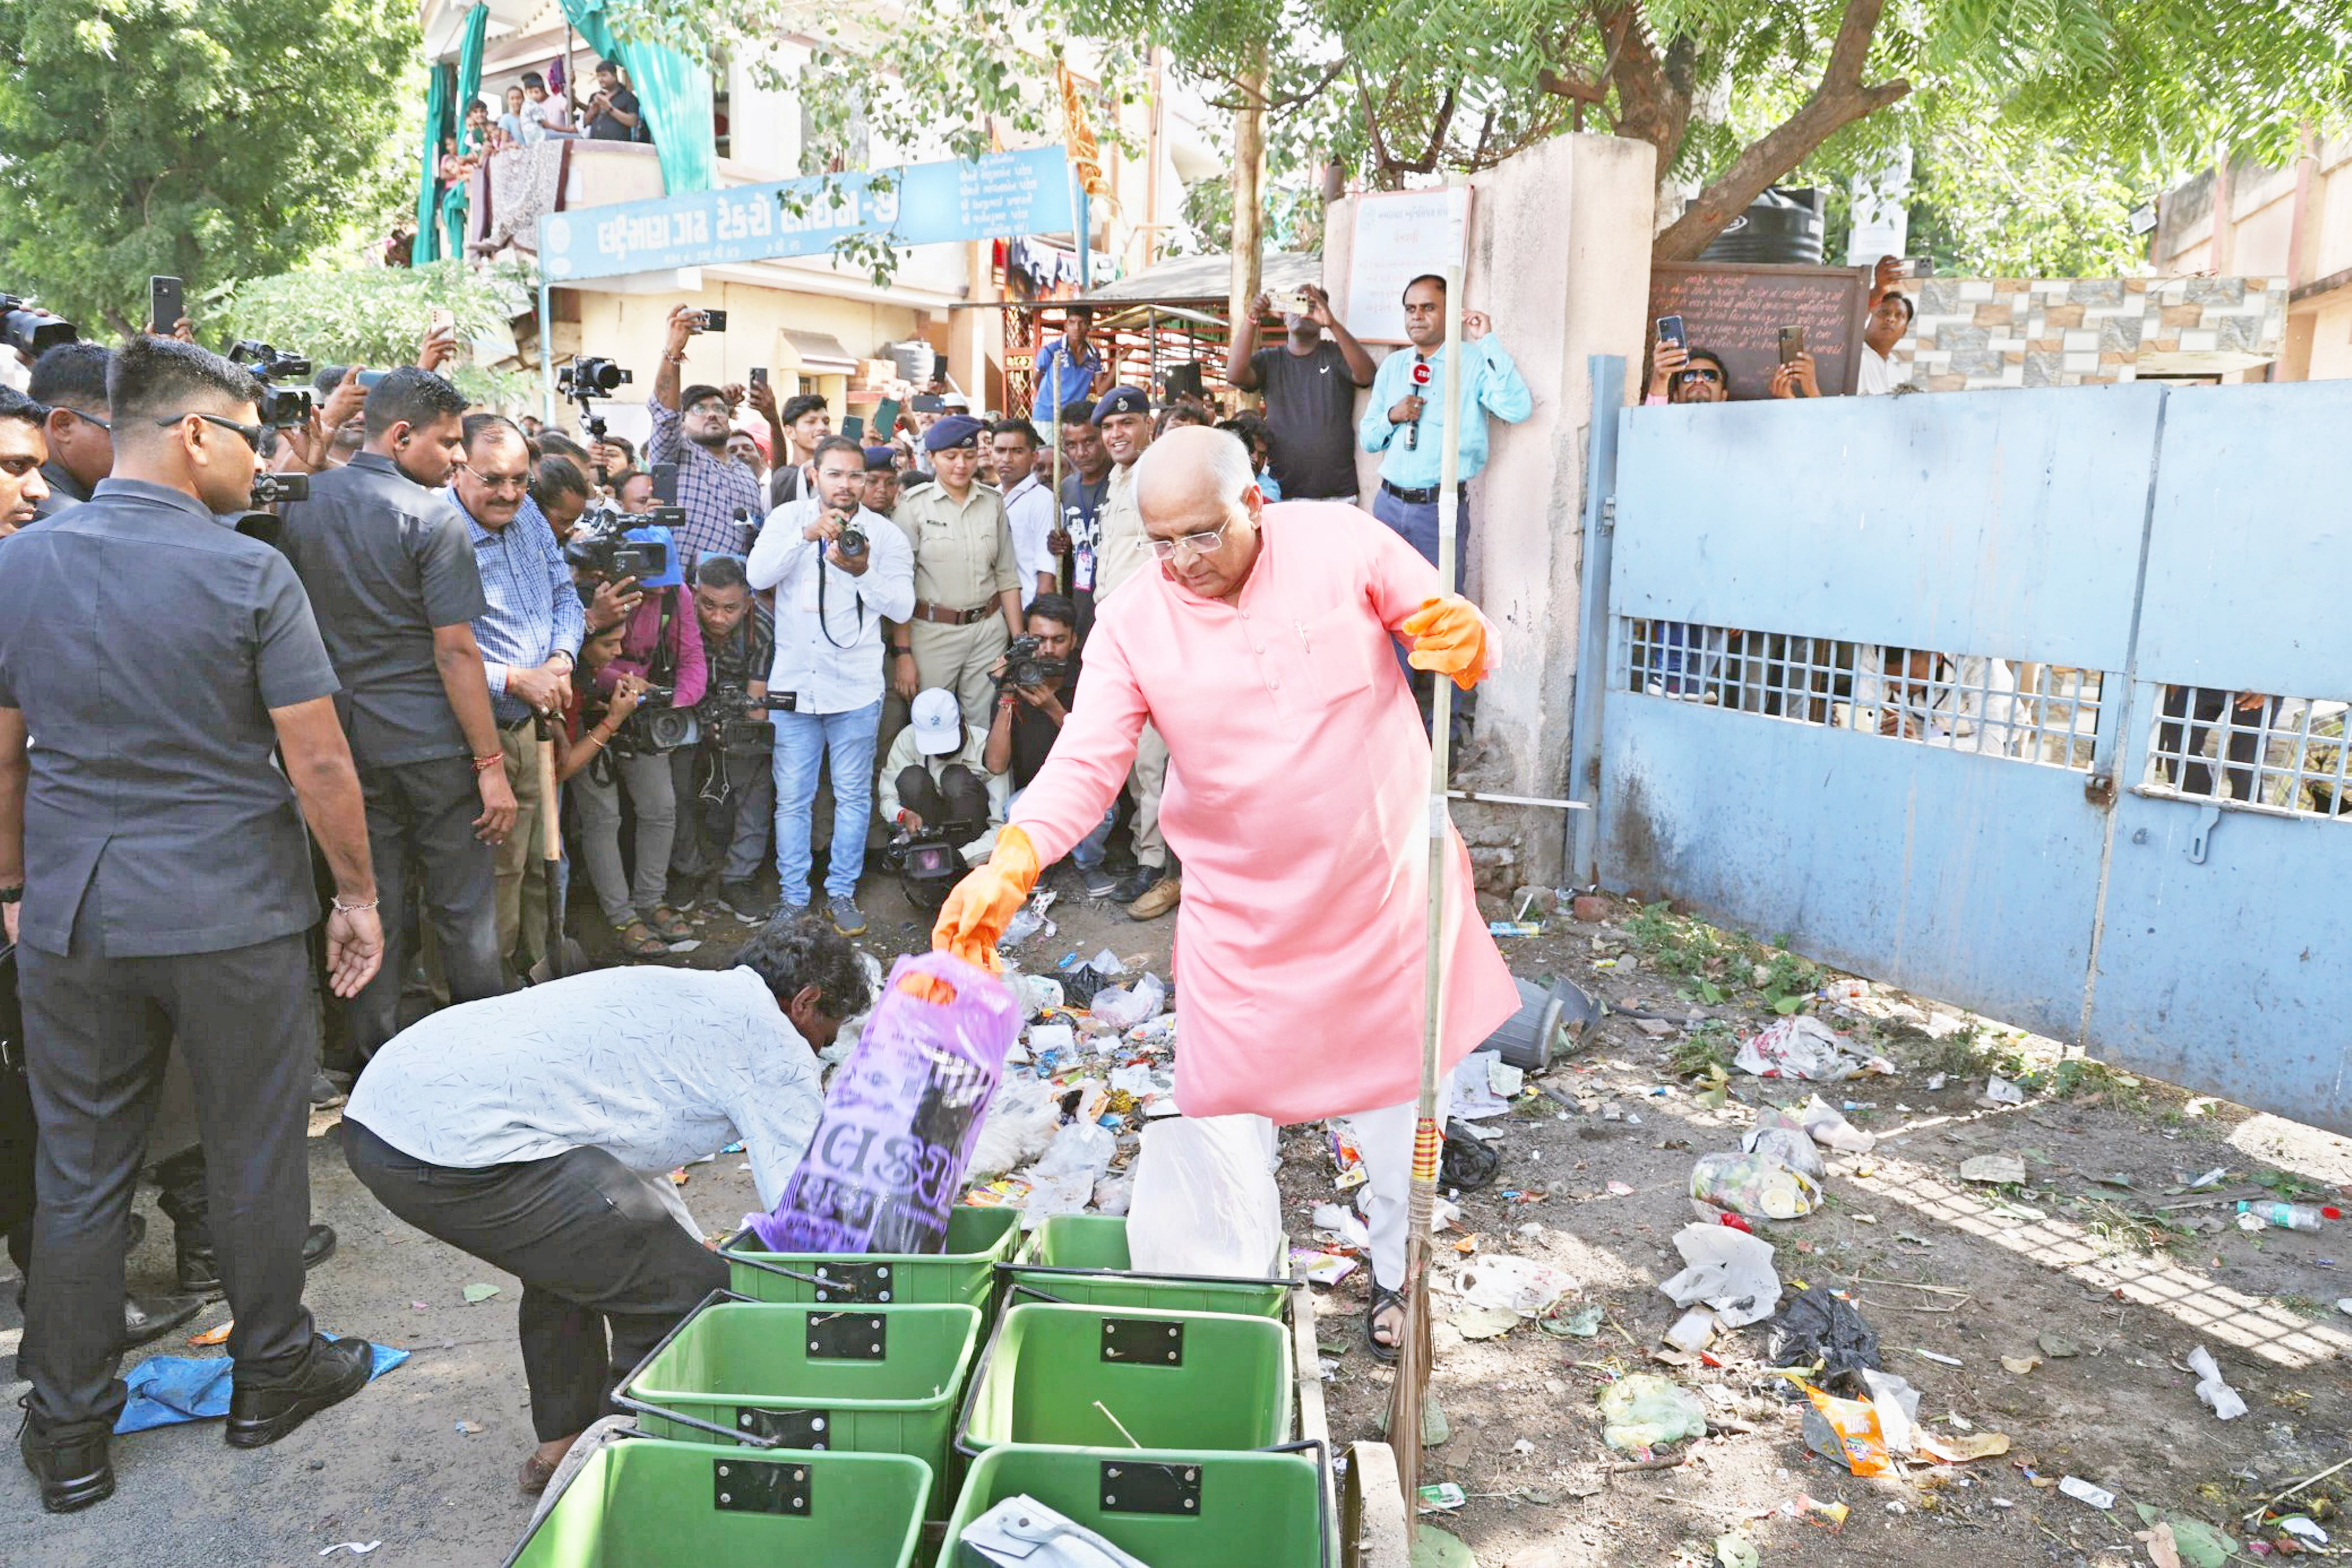 Gujarat Chief Minister Bhupendra Patel participates in a cleanliness drive organised under the 'Swachchta Pakhwada: Swachchta Hi Seva' campaign ahead of Gandhi Jayanti, at Ghatlodia in Ahmedabad district.